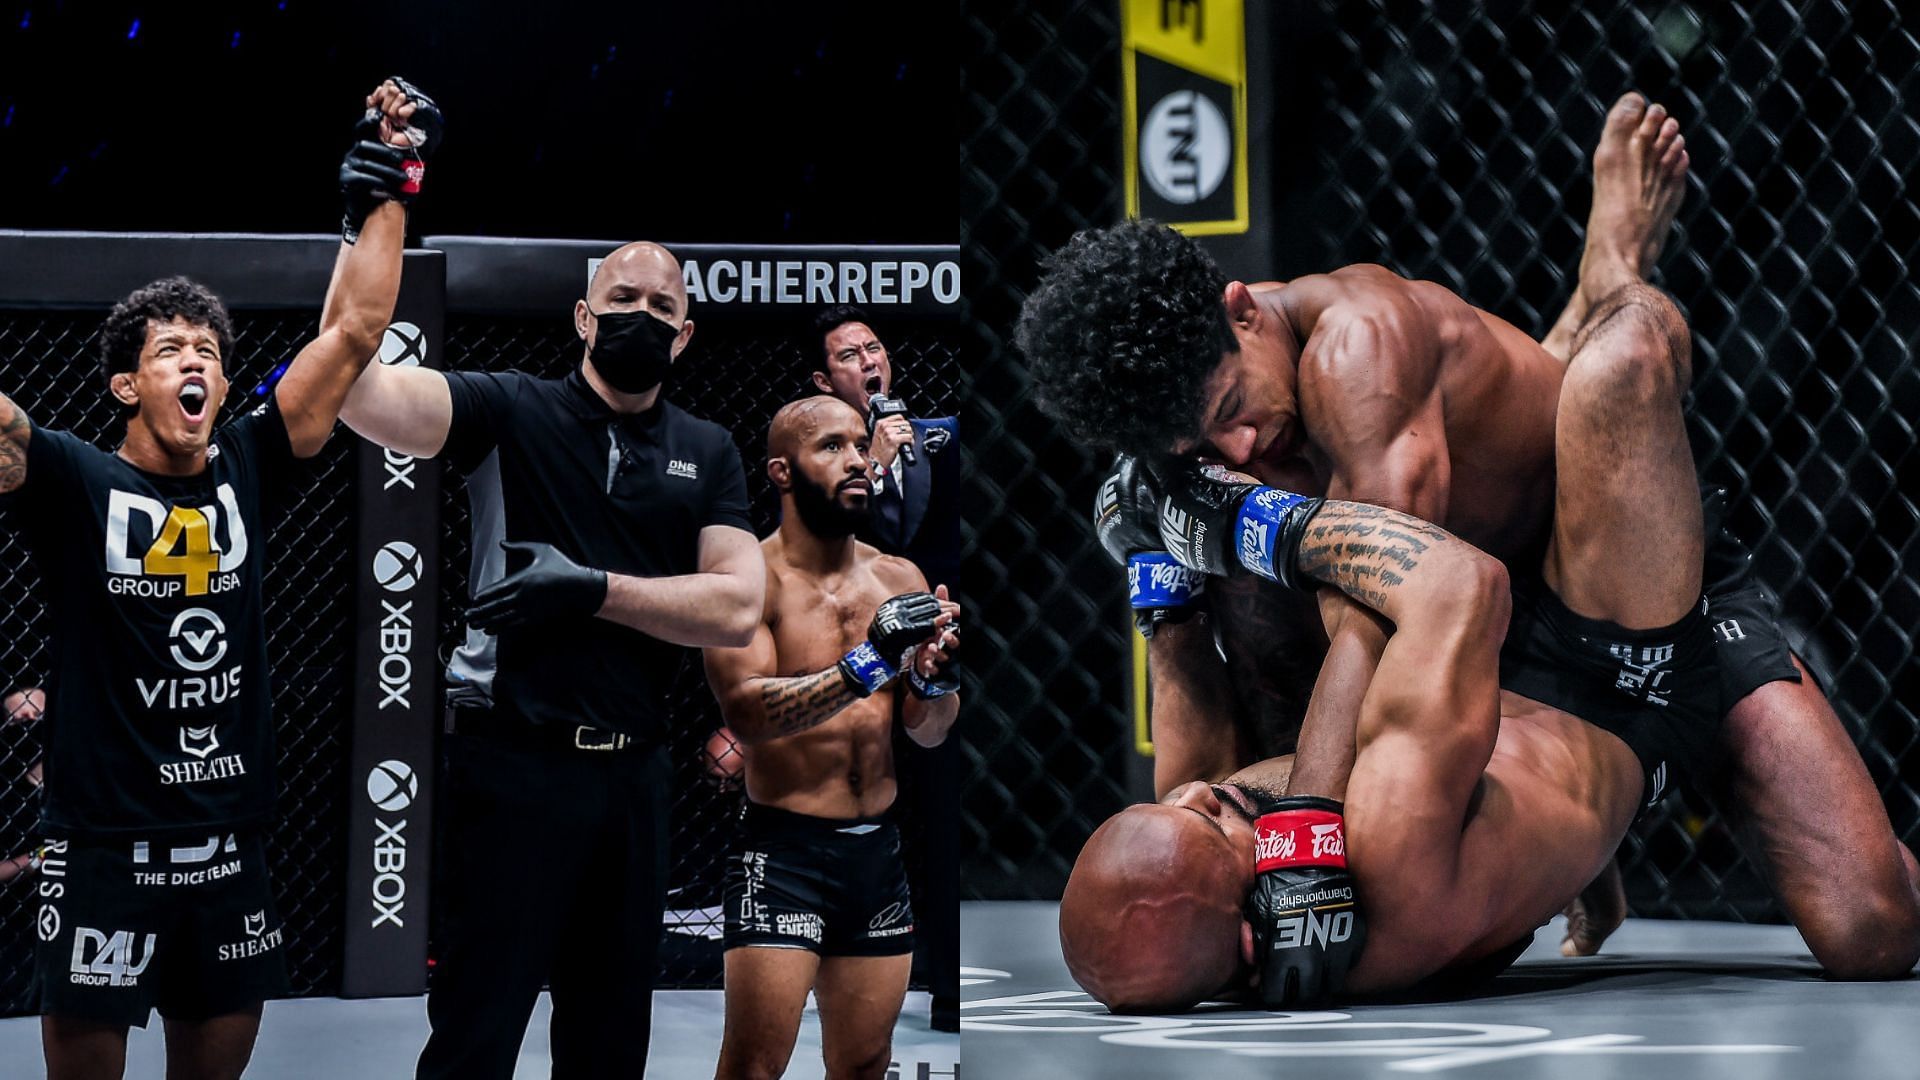 [Photo Credit: ONE Championship] Adriano Moraes and Demetrious Johnson